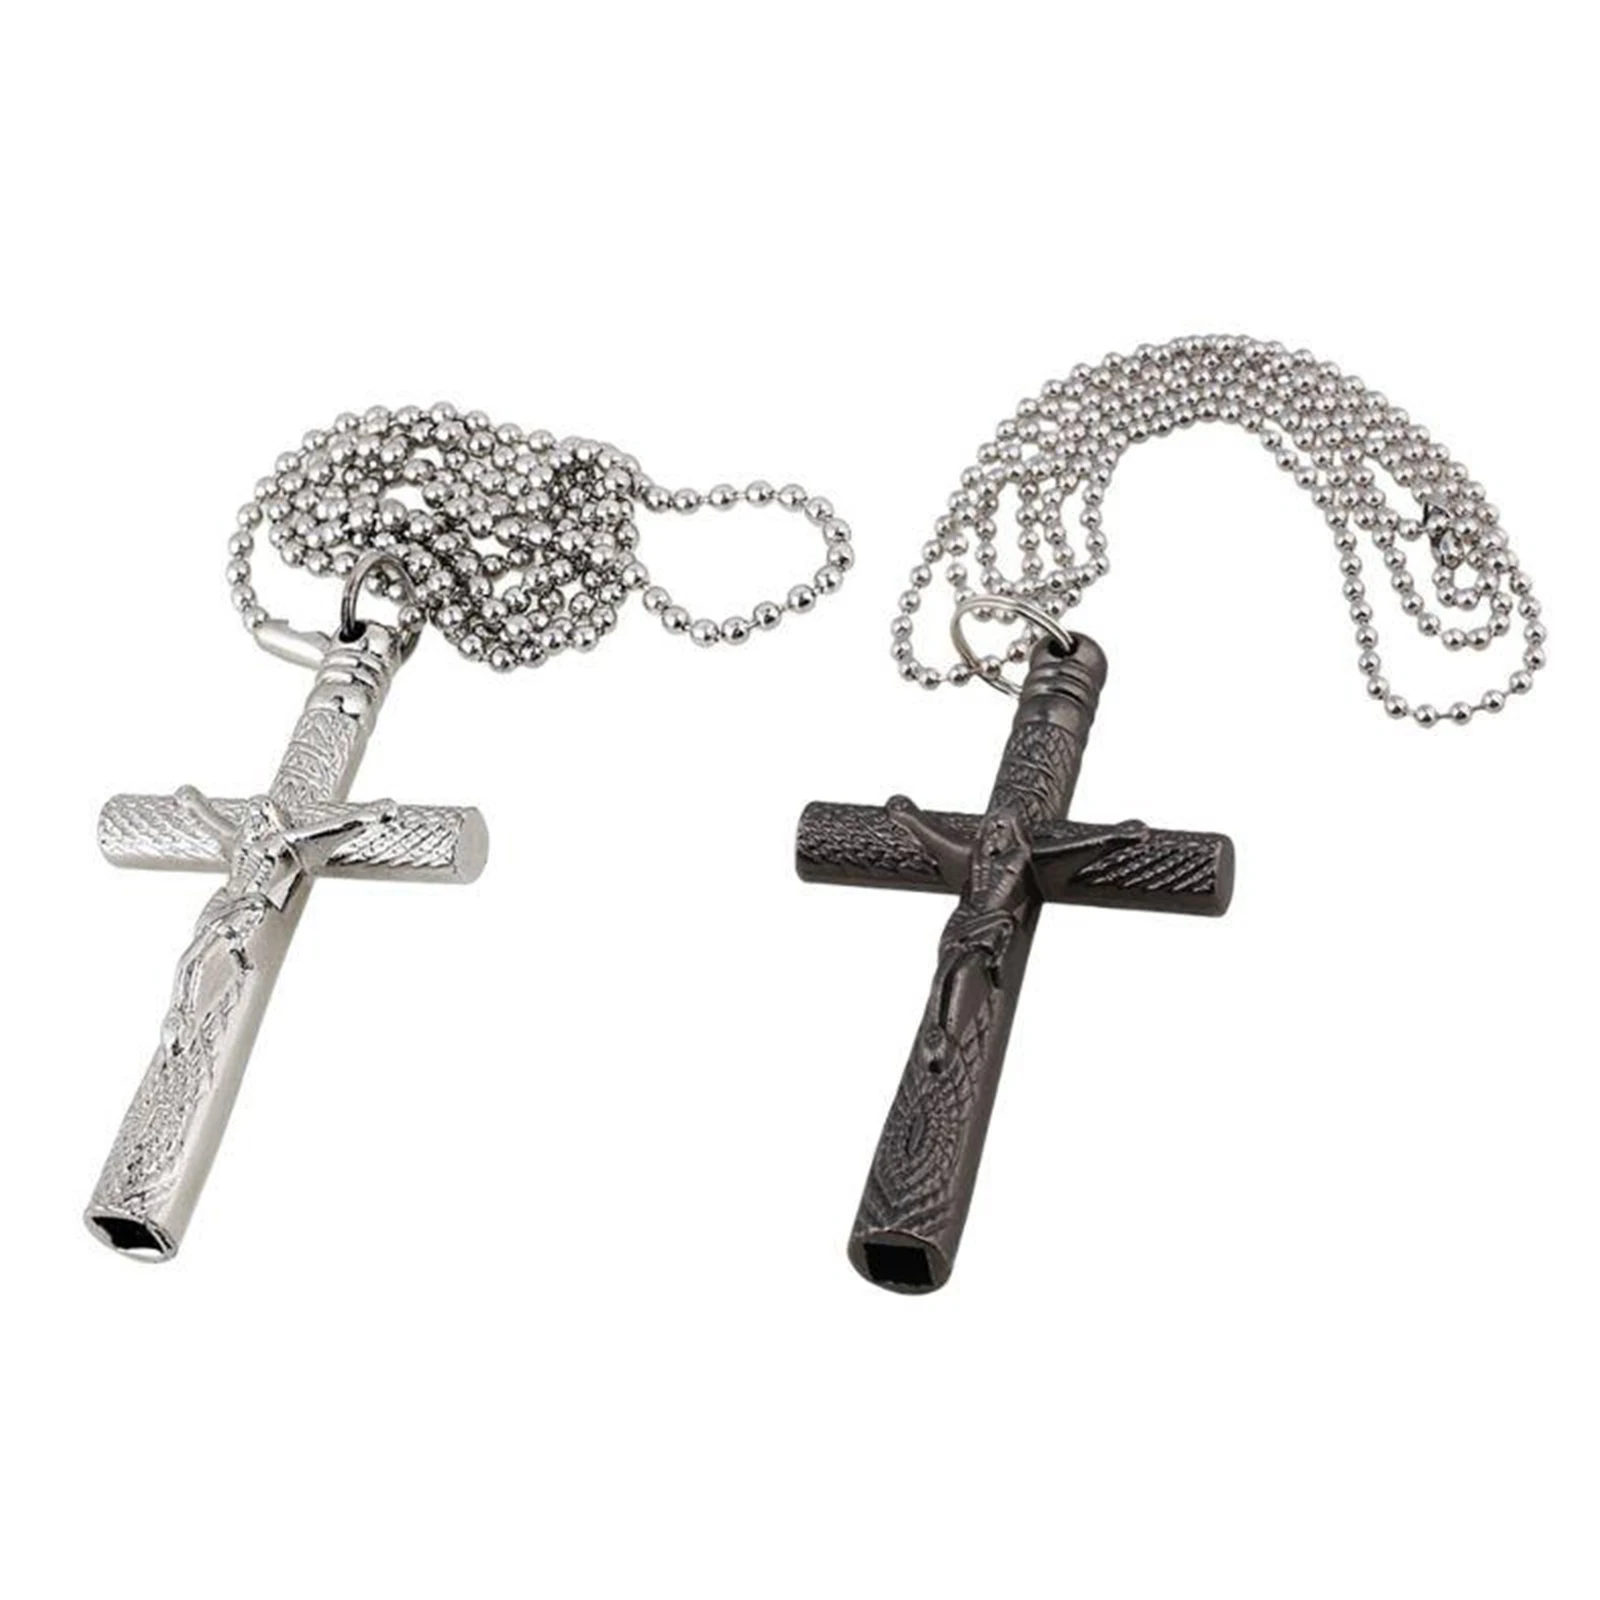 Steel Cross Drum Tuning Key Necklace Pendant Wrench Instruments Parts Accs